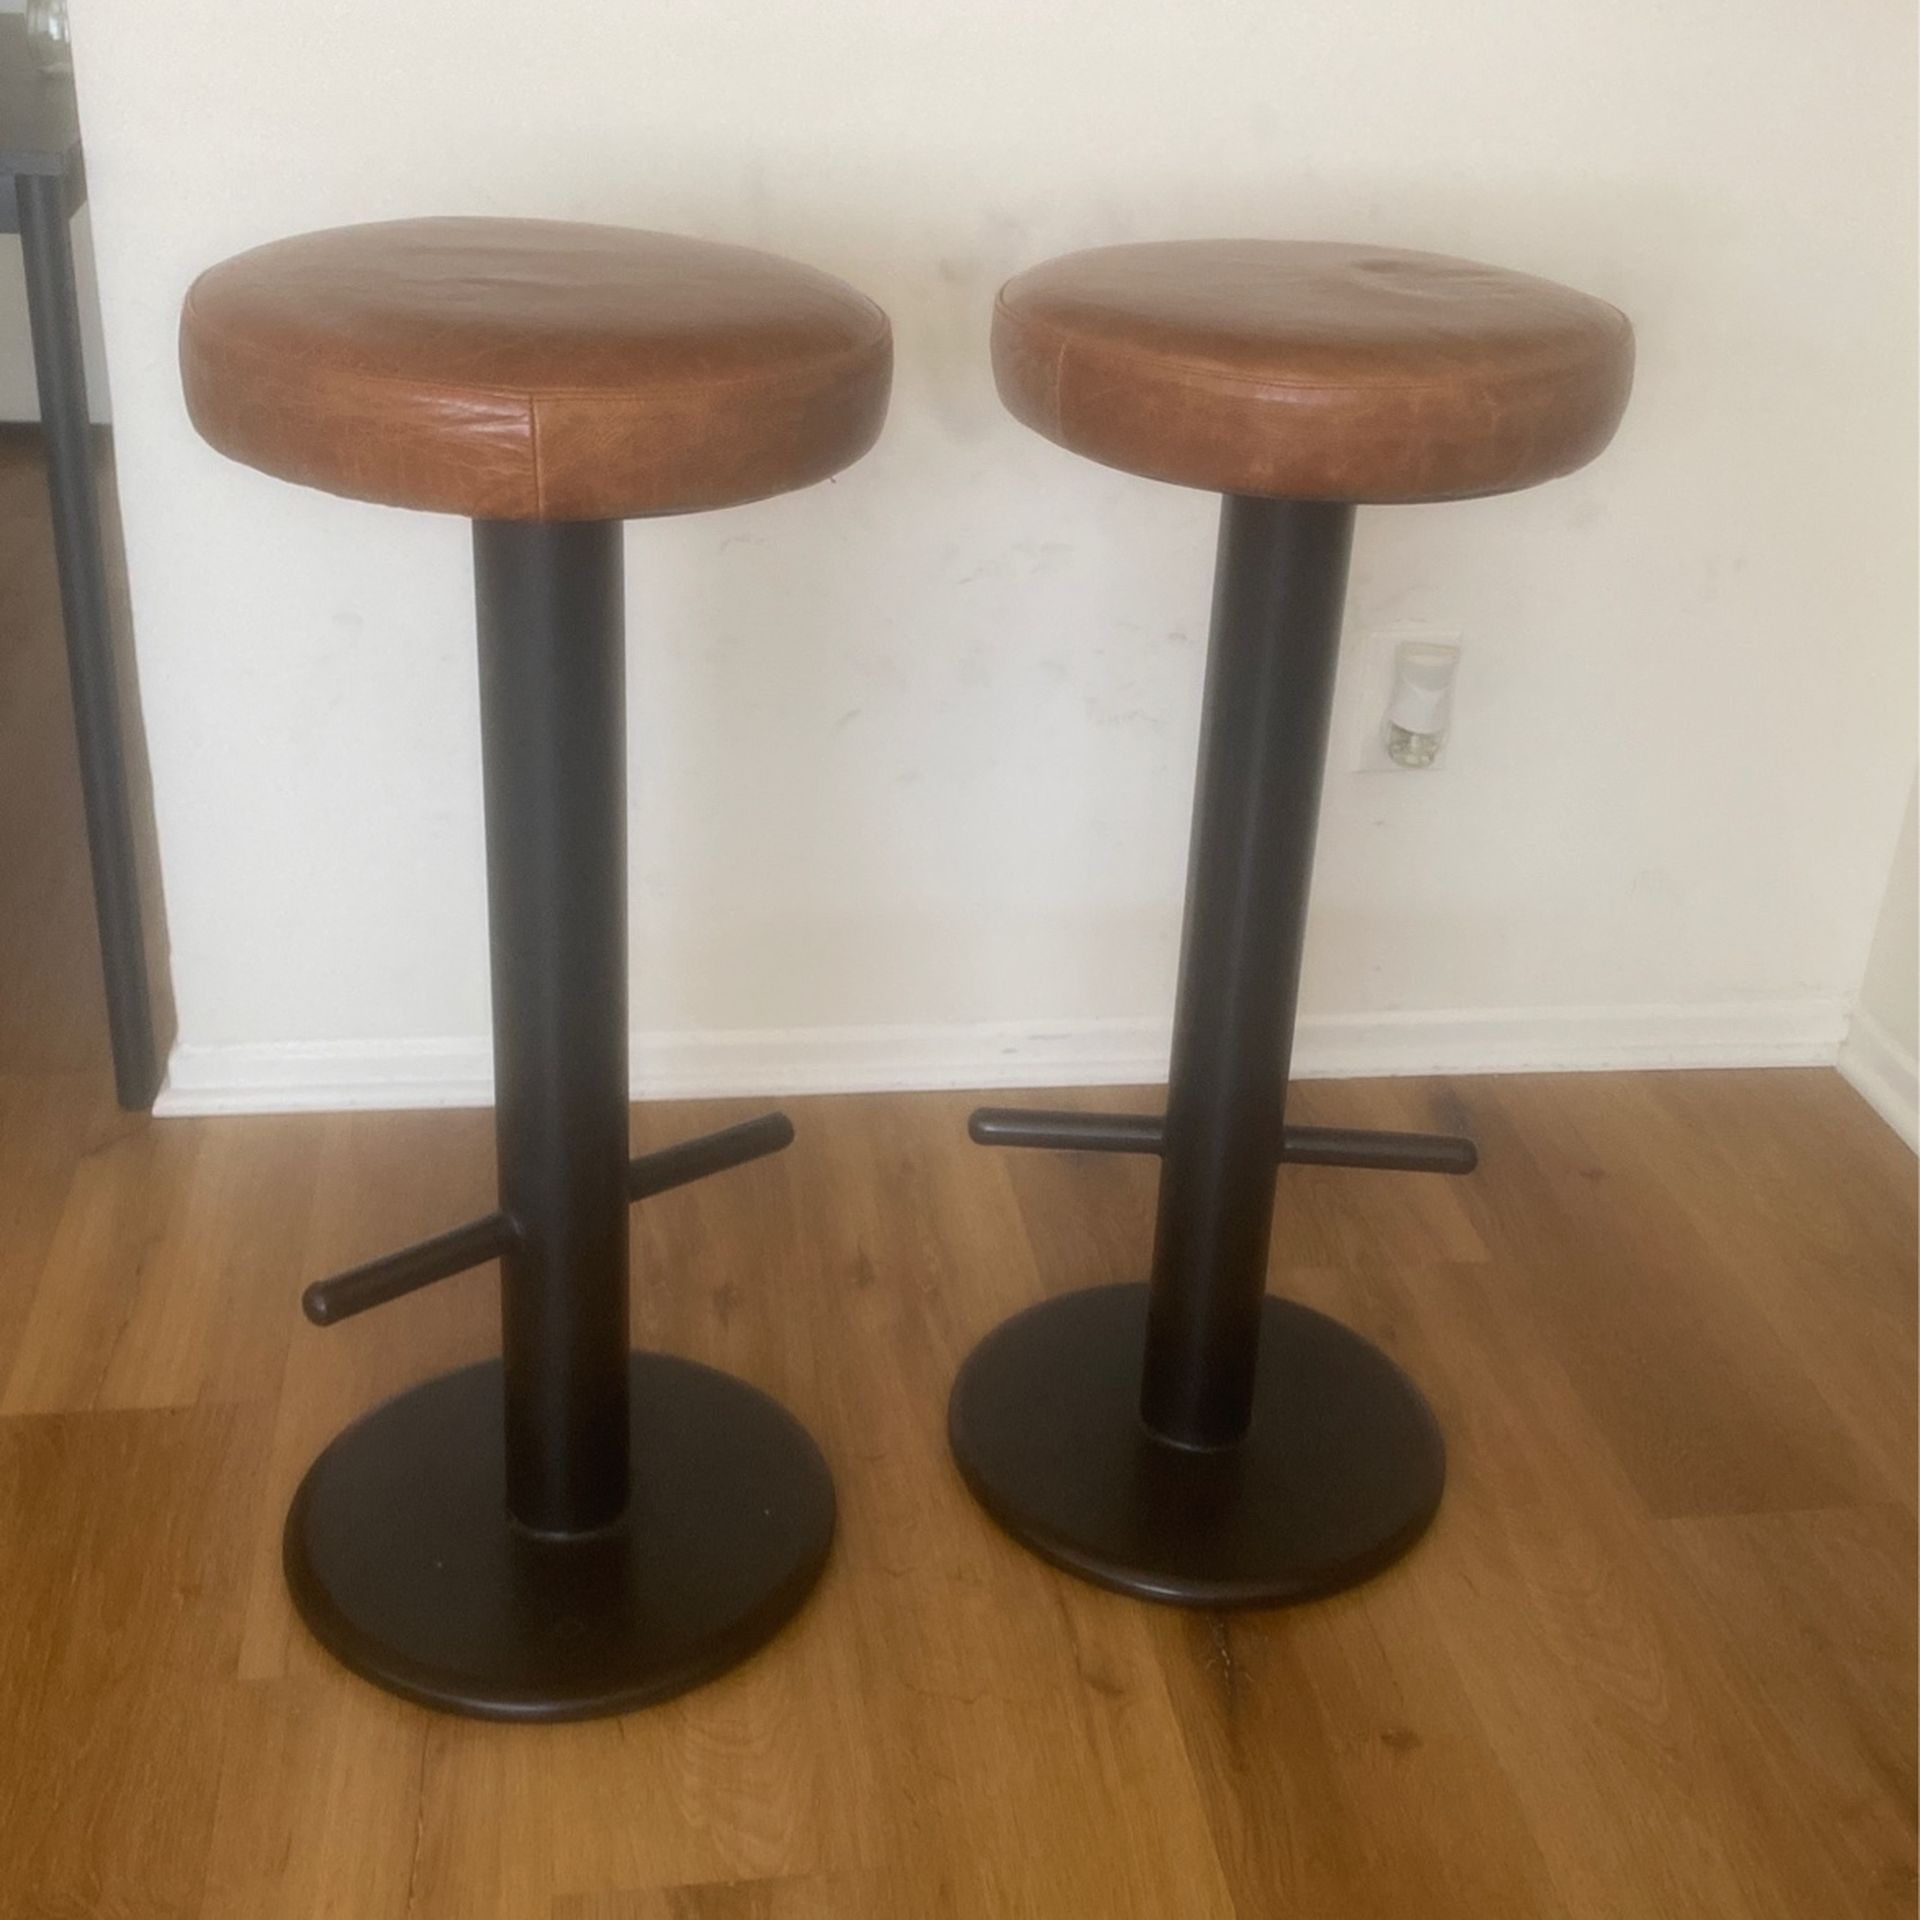 Set Of 2 Leather Bar Stools 30 1/2 Inches Top To Bottom 